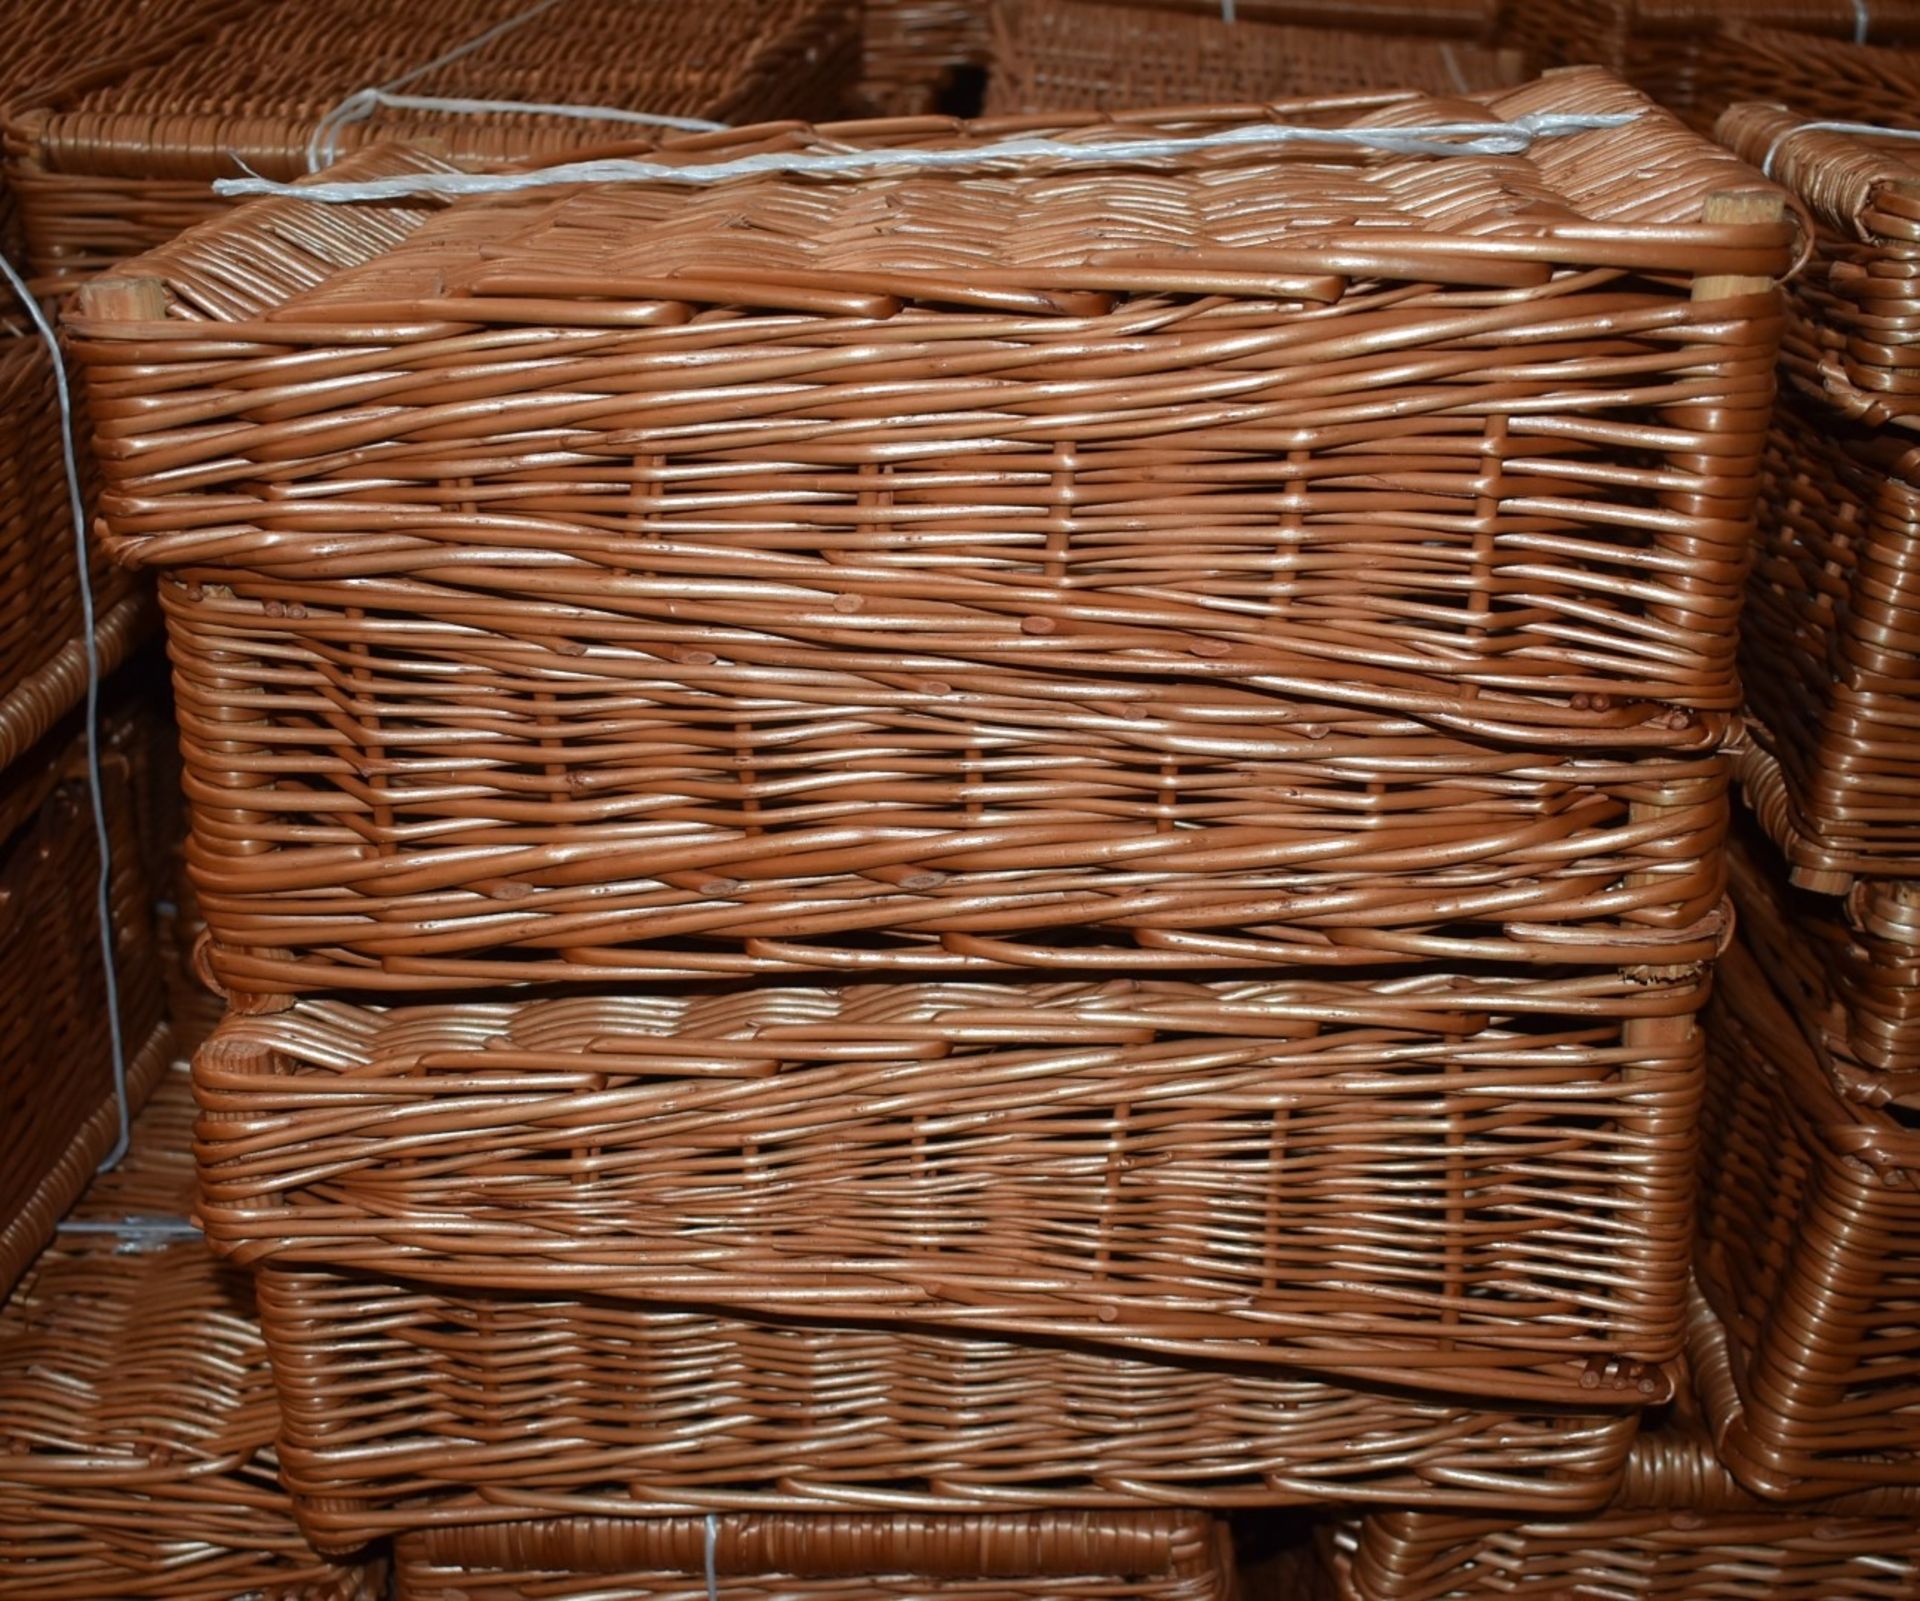 8 x Hand Woven Retail Display Sloping Wicker Baskets - Ideal For Presentation in Wide Range of - Image 5 of 10